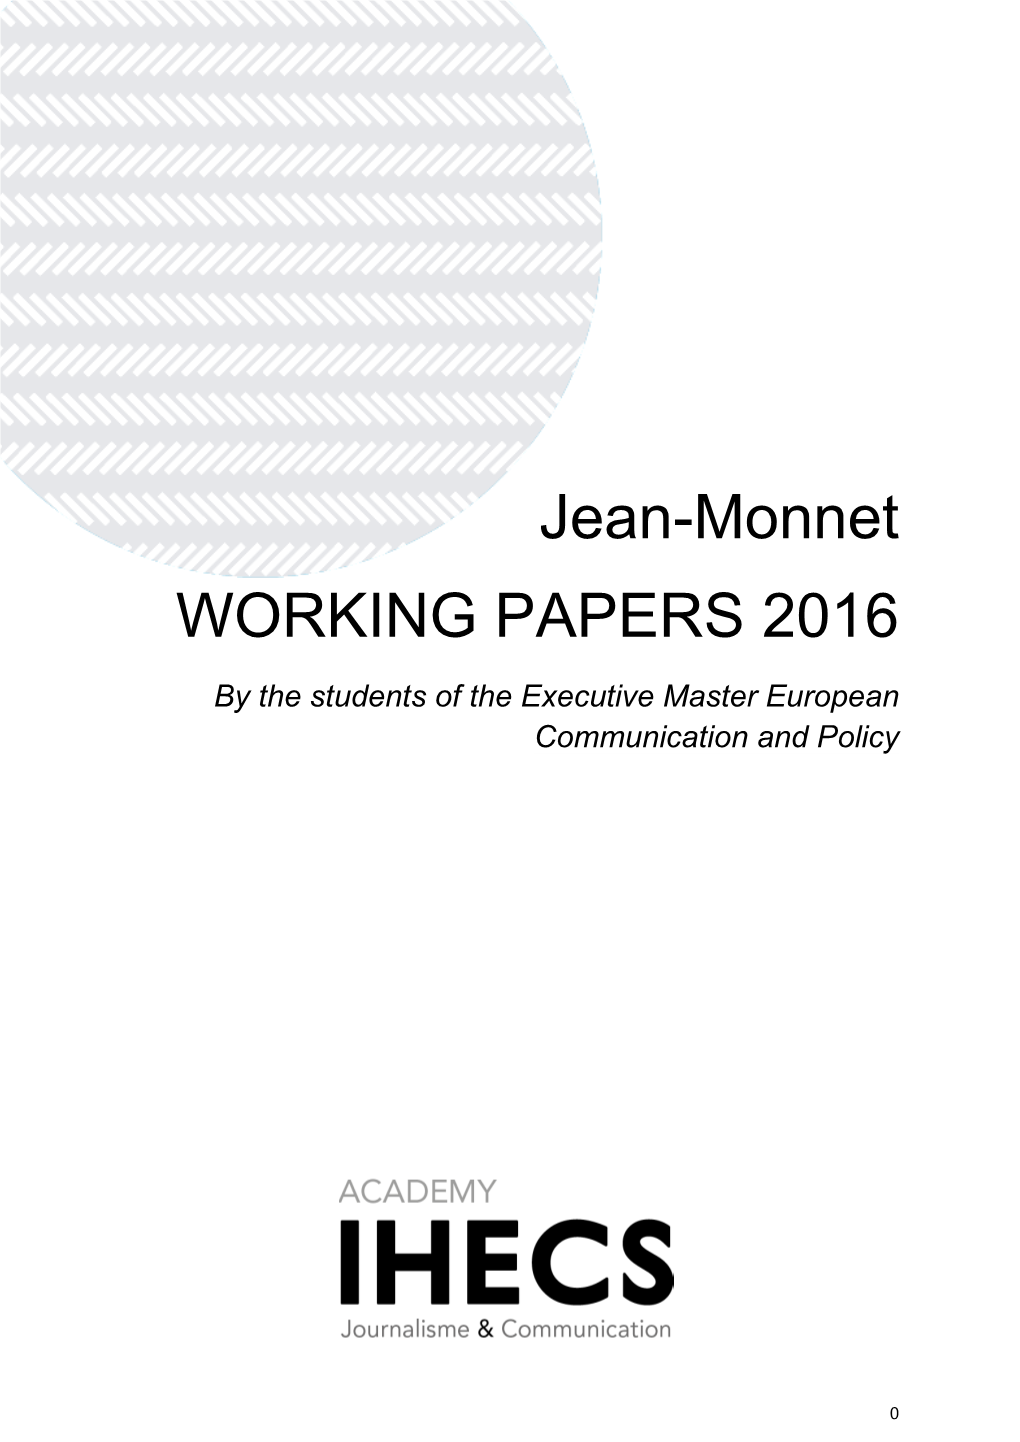 Jean-Monnet WORKING PAPERS 2016